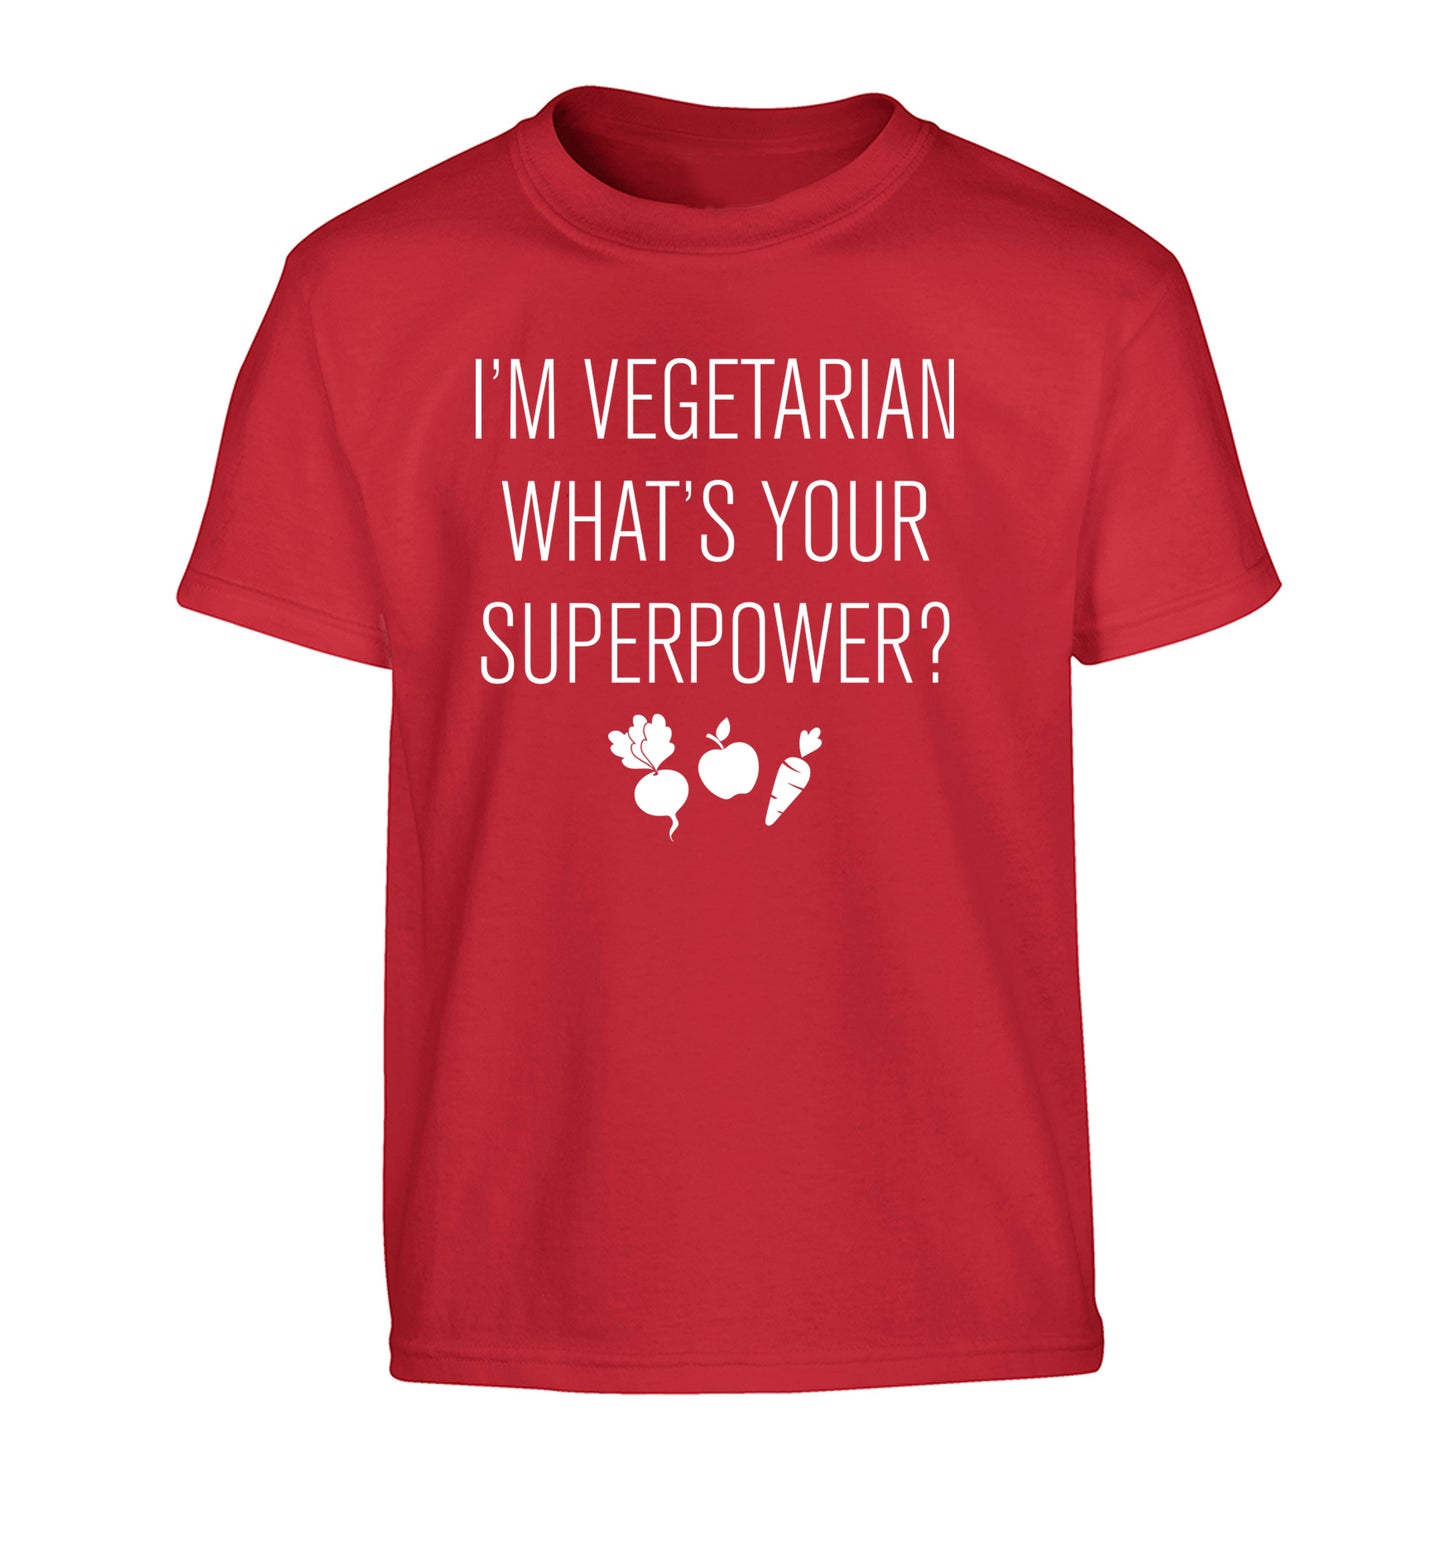 I'm vegetarian what's your superpower? Children's red Tshirt 12-13 Years